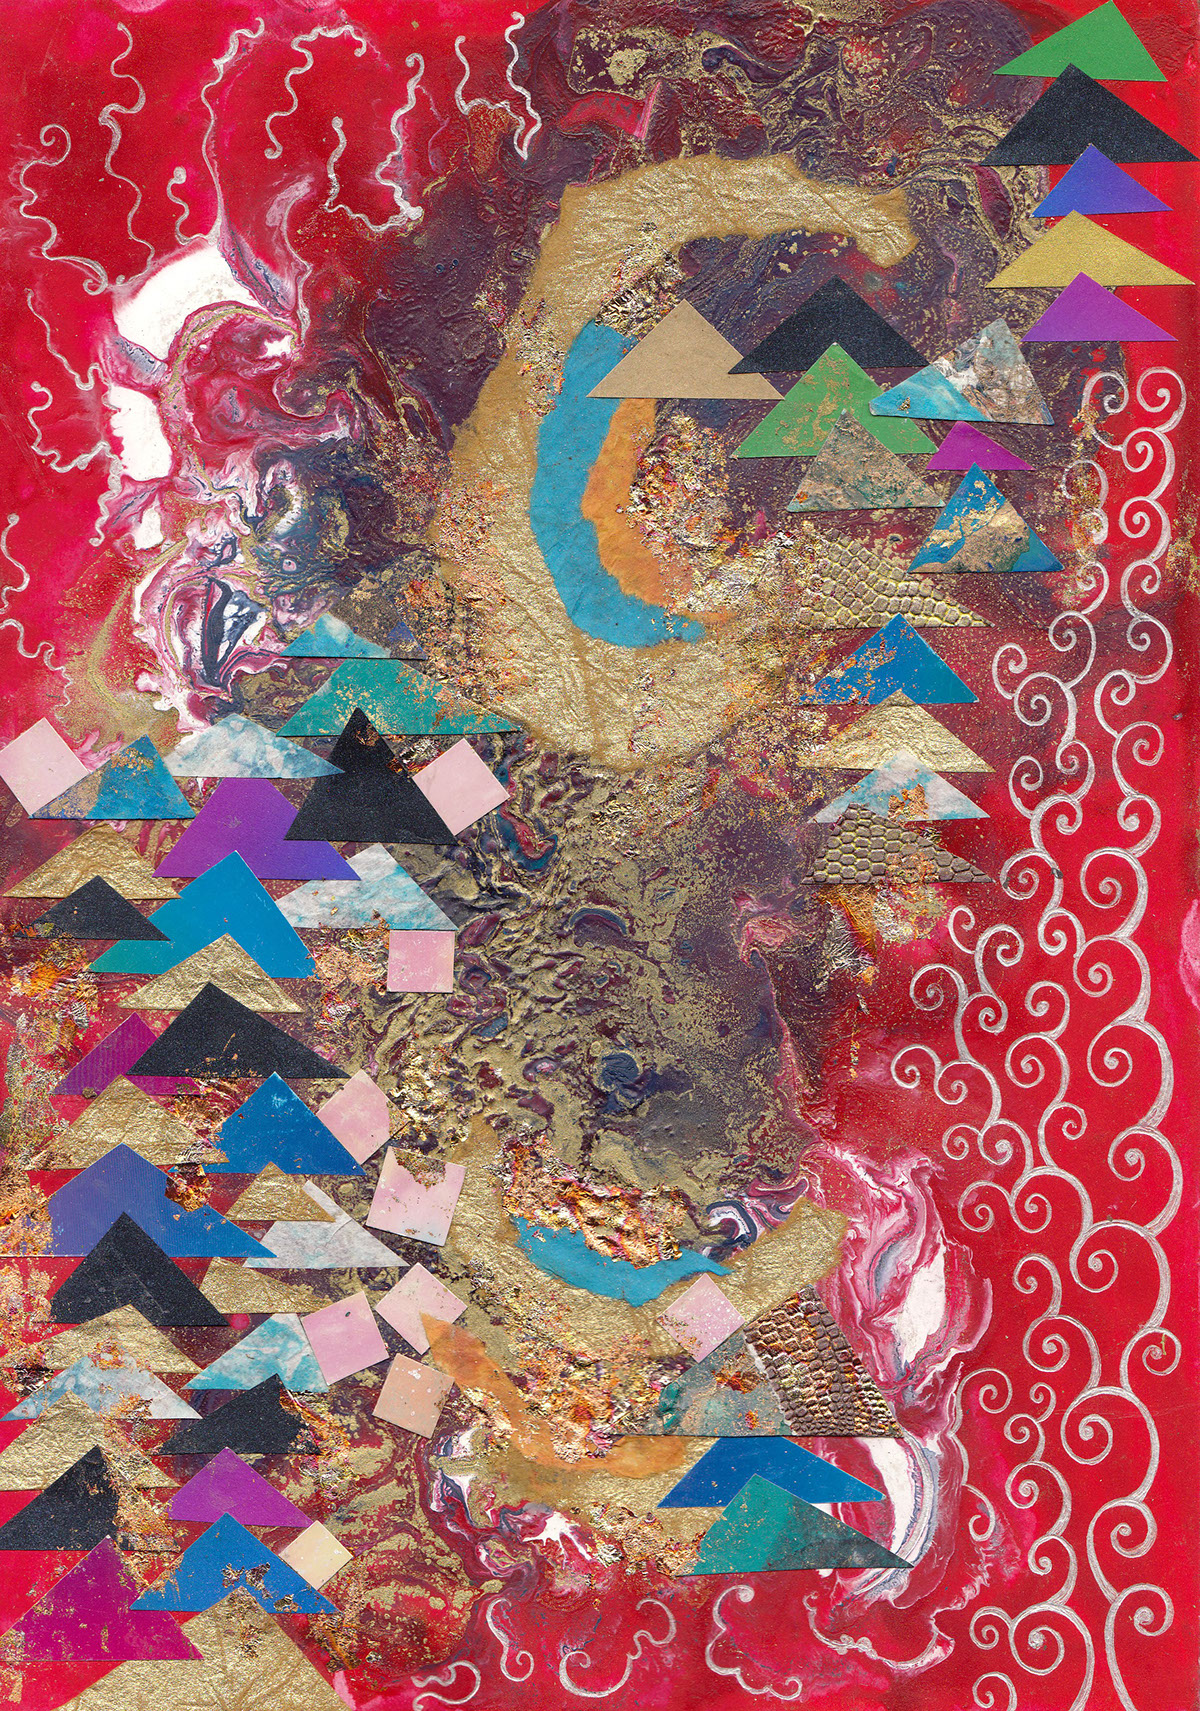 collage patternistic mixed-media red gold blue marbling kaleidoscopic